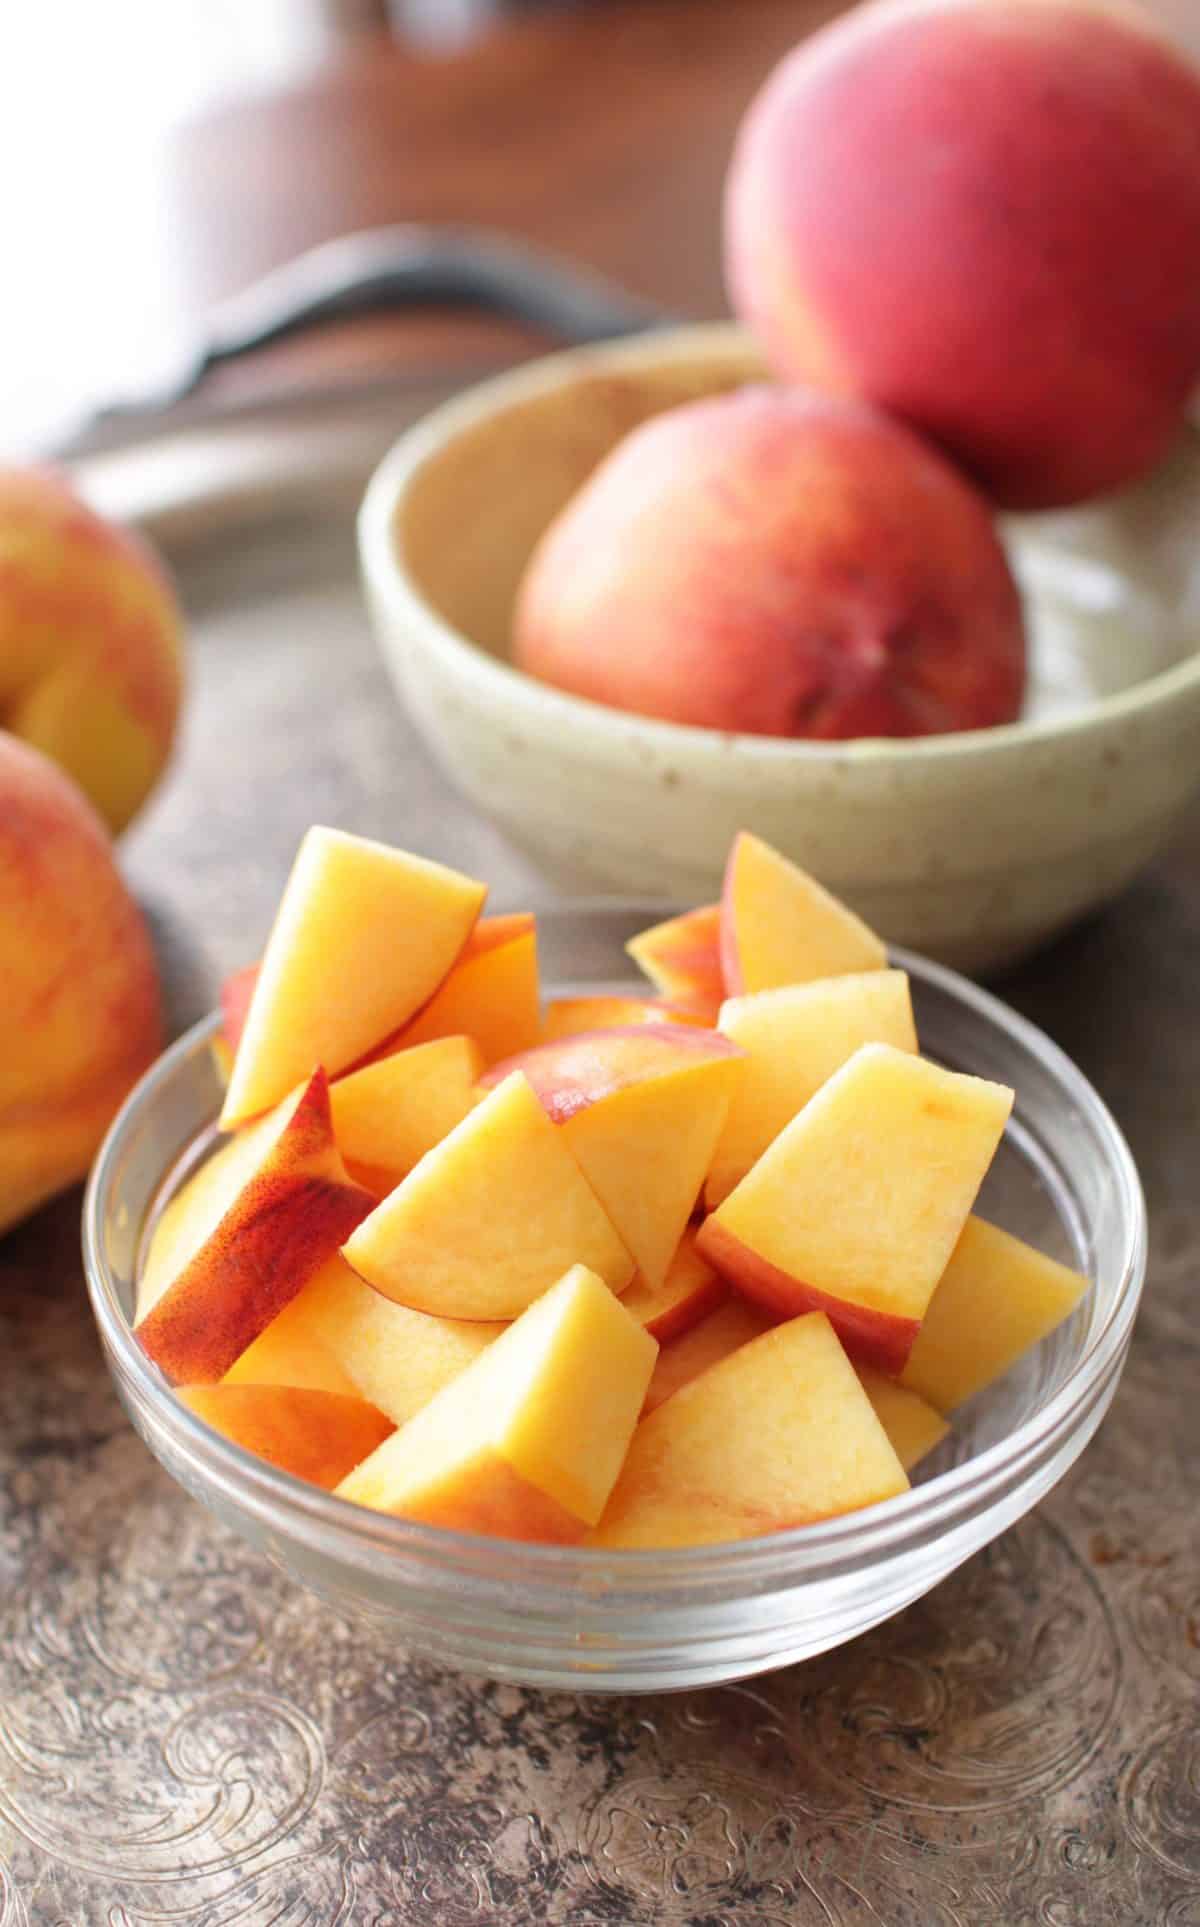 A small bowl filled with chopped peaches next to a bowl of whole peaches on a metal tray.